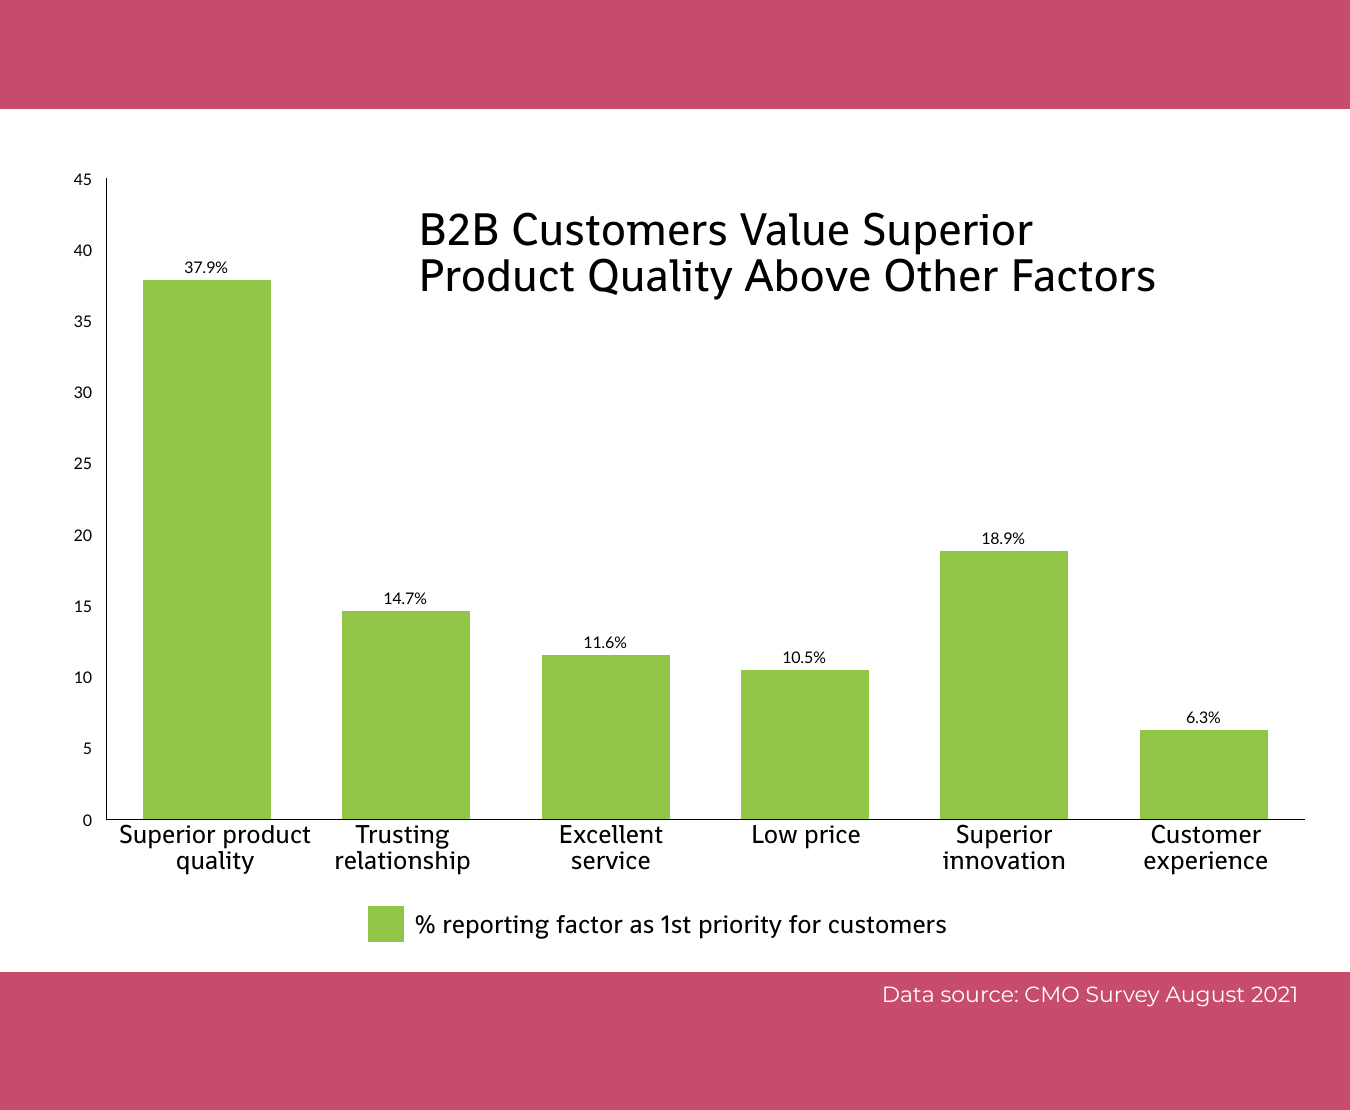 B2B Product Customer Priorities in 2021 were Superior Product Quality (37.9%), Trusting relationship (14.7%), Excellent service (11.6%), Low price (10.5%), Superior innovation (18.9%) and Cutomer experience (6.3%)